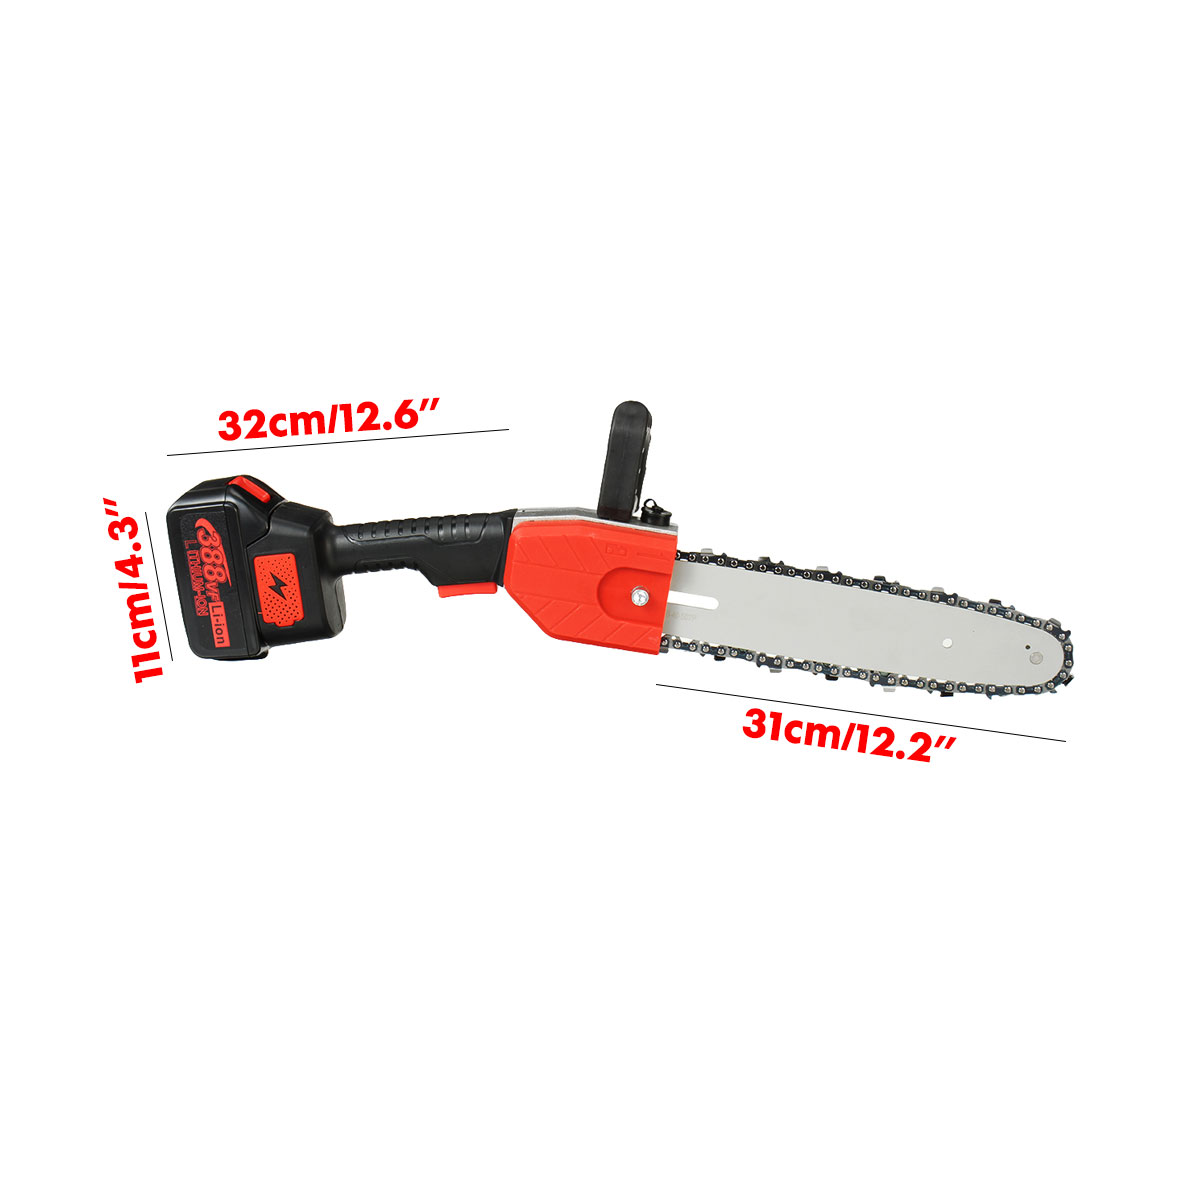 10-Inch-Cordless-Electric-Chain-Saw-One-Hand-Saw-Woodworking-Wood-Cutter-W-12pcs-Battery-Also-Adapte-1851017-10